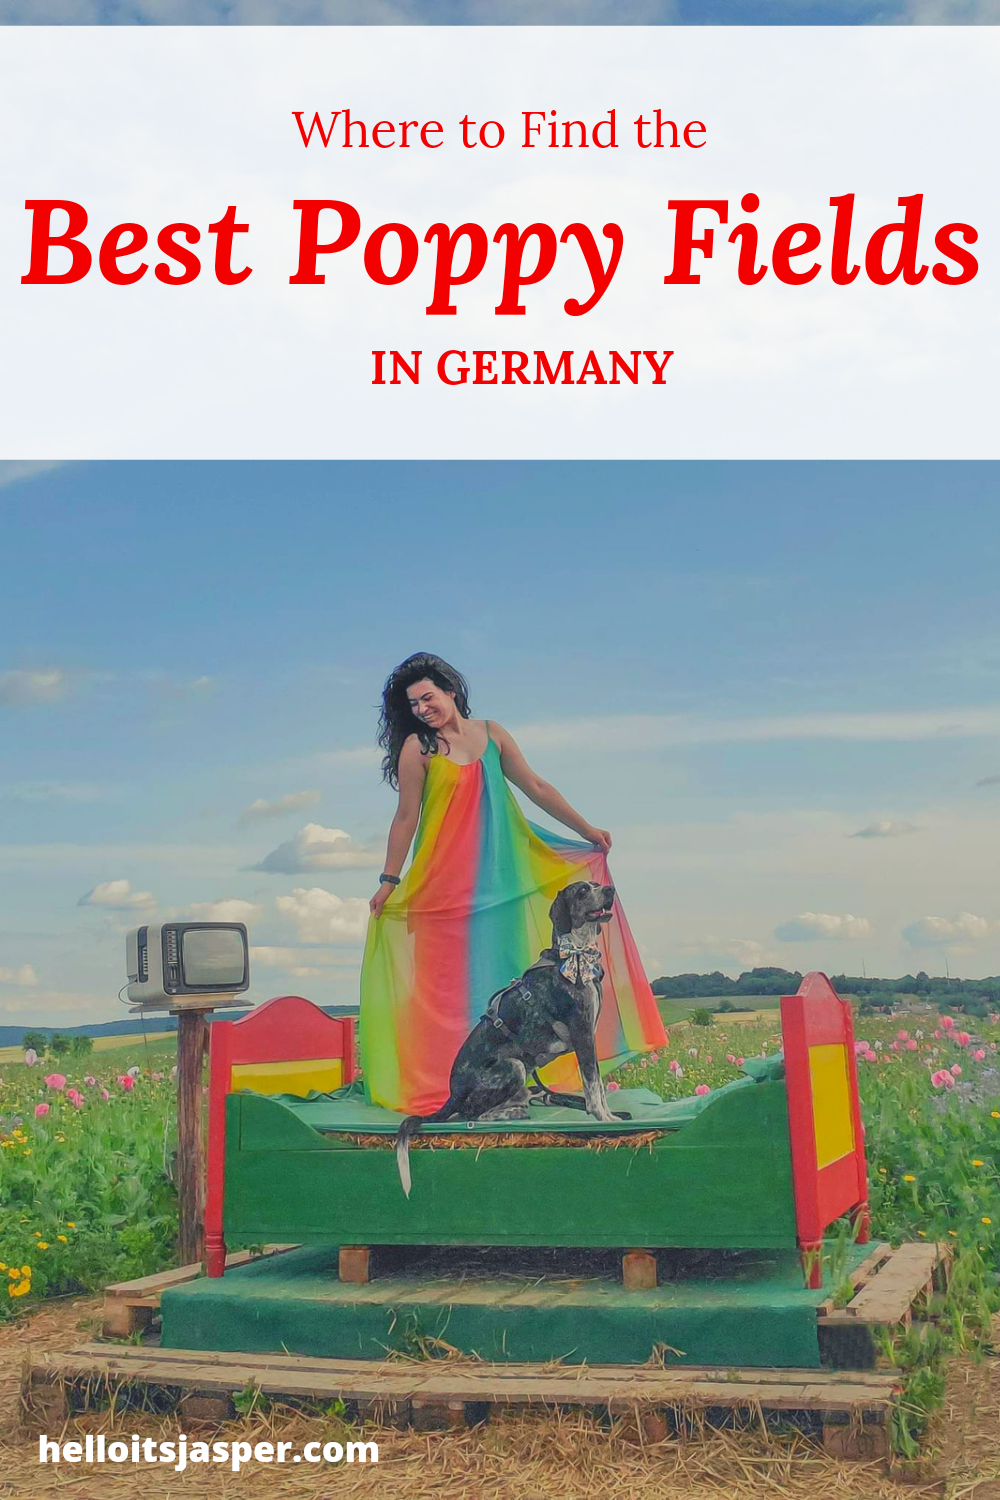 Where to Find the Best Poppy Fields in Germany